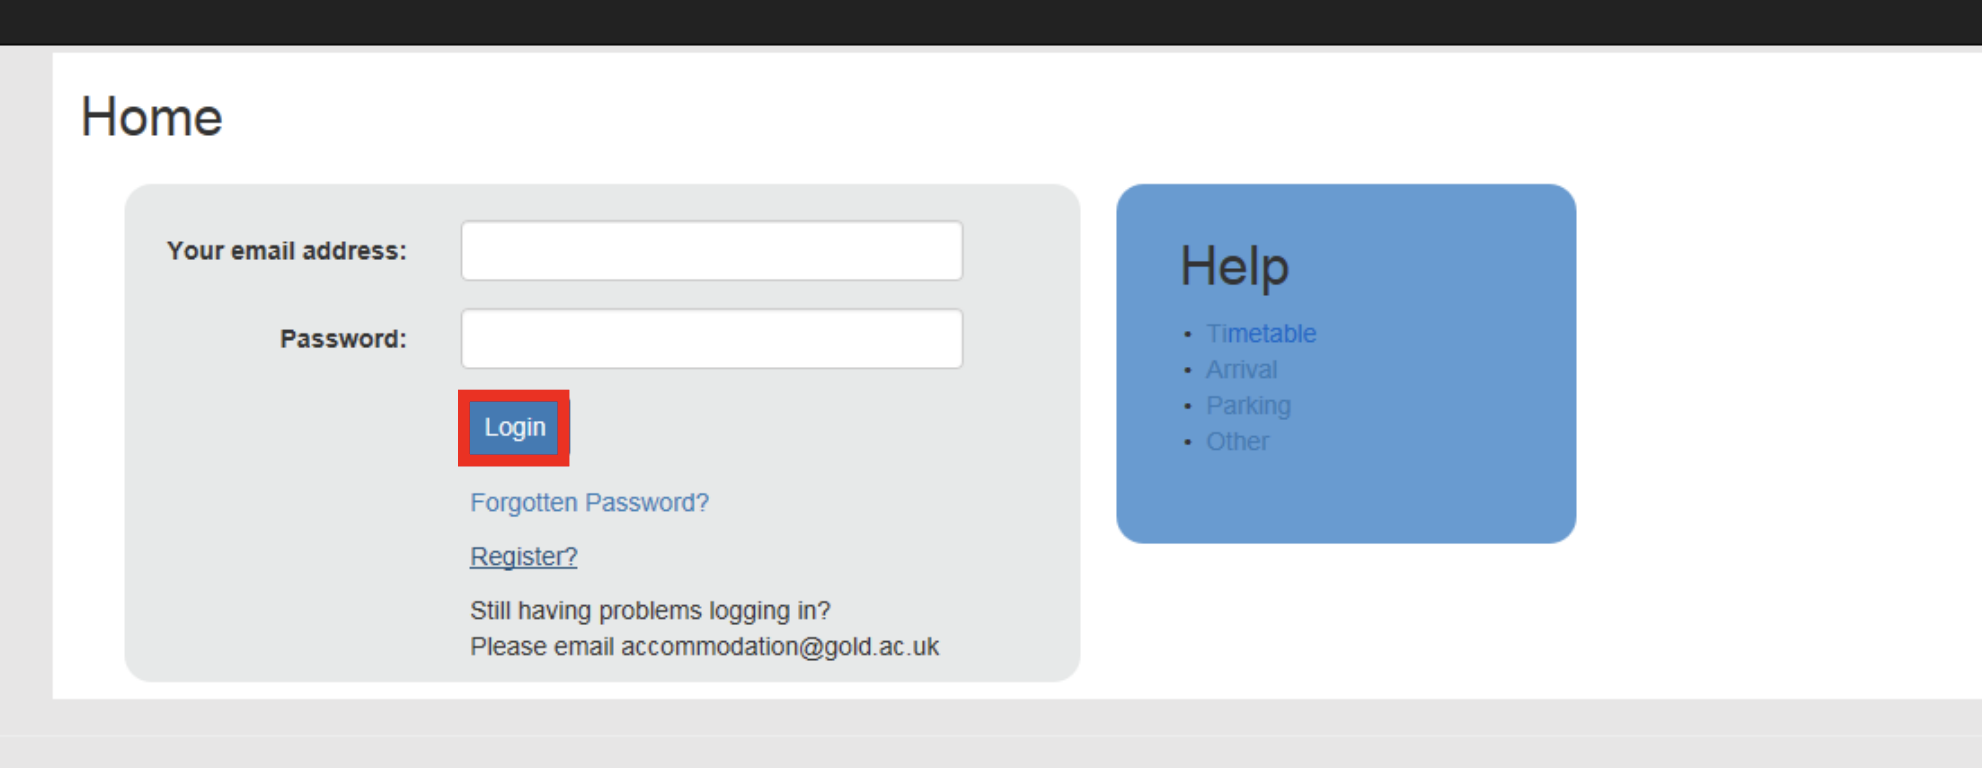 A screenshot of the Goldsmiths portal landing page with a link to registering.